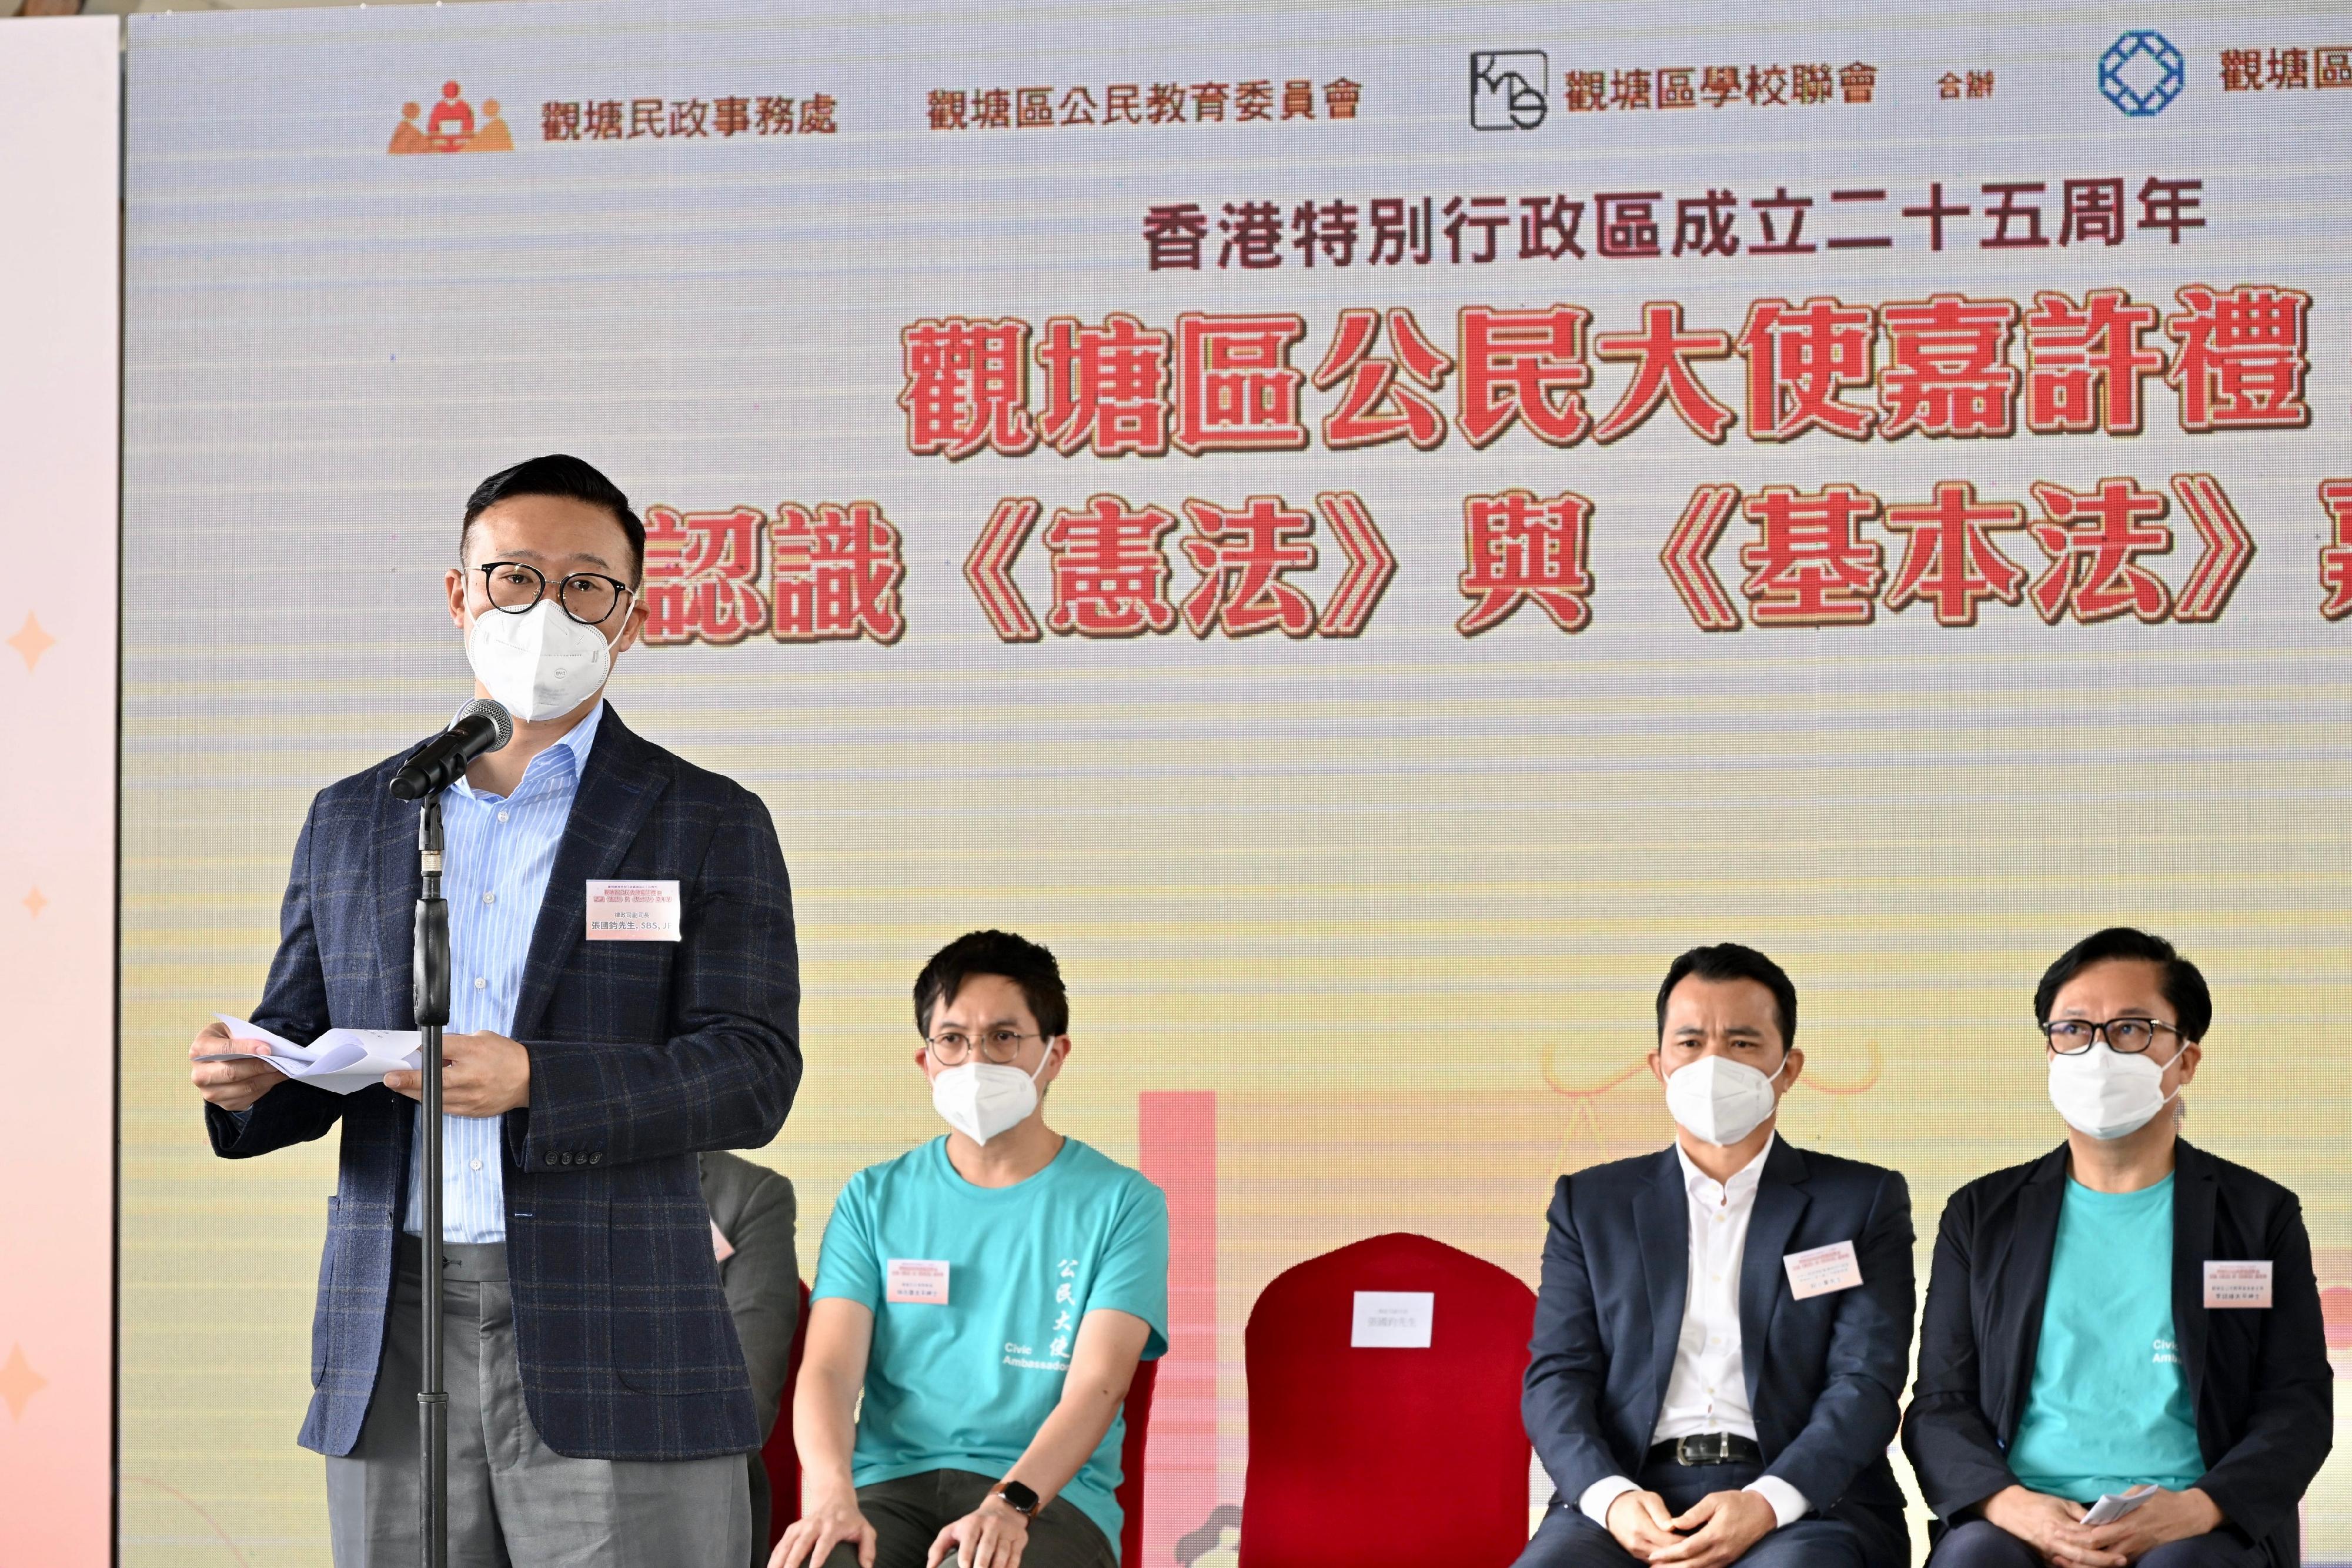 With the aim of enhancing different social sectors' awareness of the Constitution and promoting the constitutional spirit, the Kwun Tong District Office, together with local district organisations, organised promotional and educational activities on the Constitution today (December 4). Photo shows the Deputy Secretary for Justice, Mr Cheung Kwok-kwan, presenting at the Constitution and Basic Law carnival.